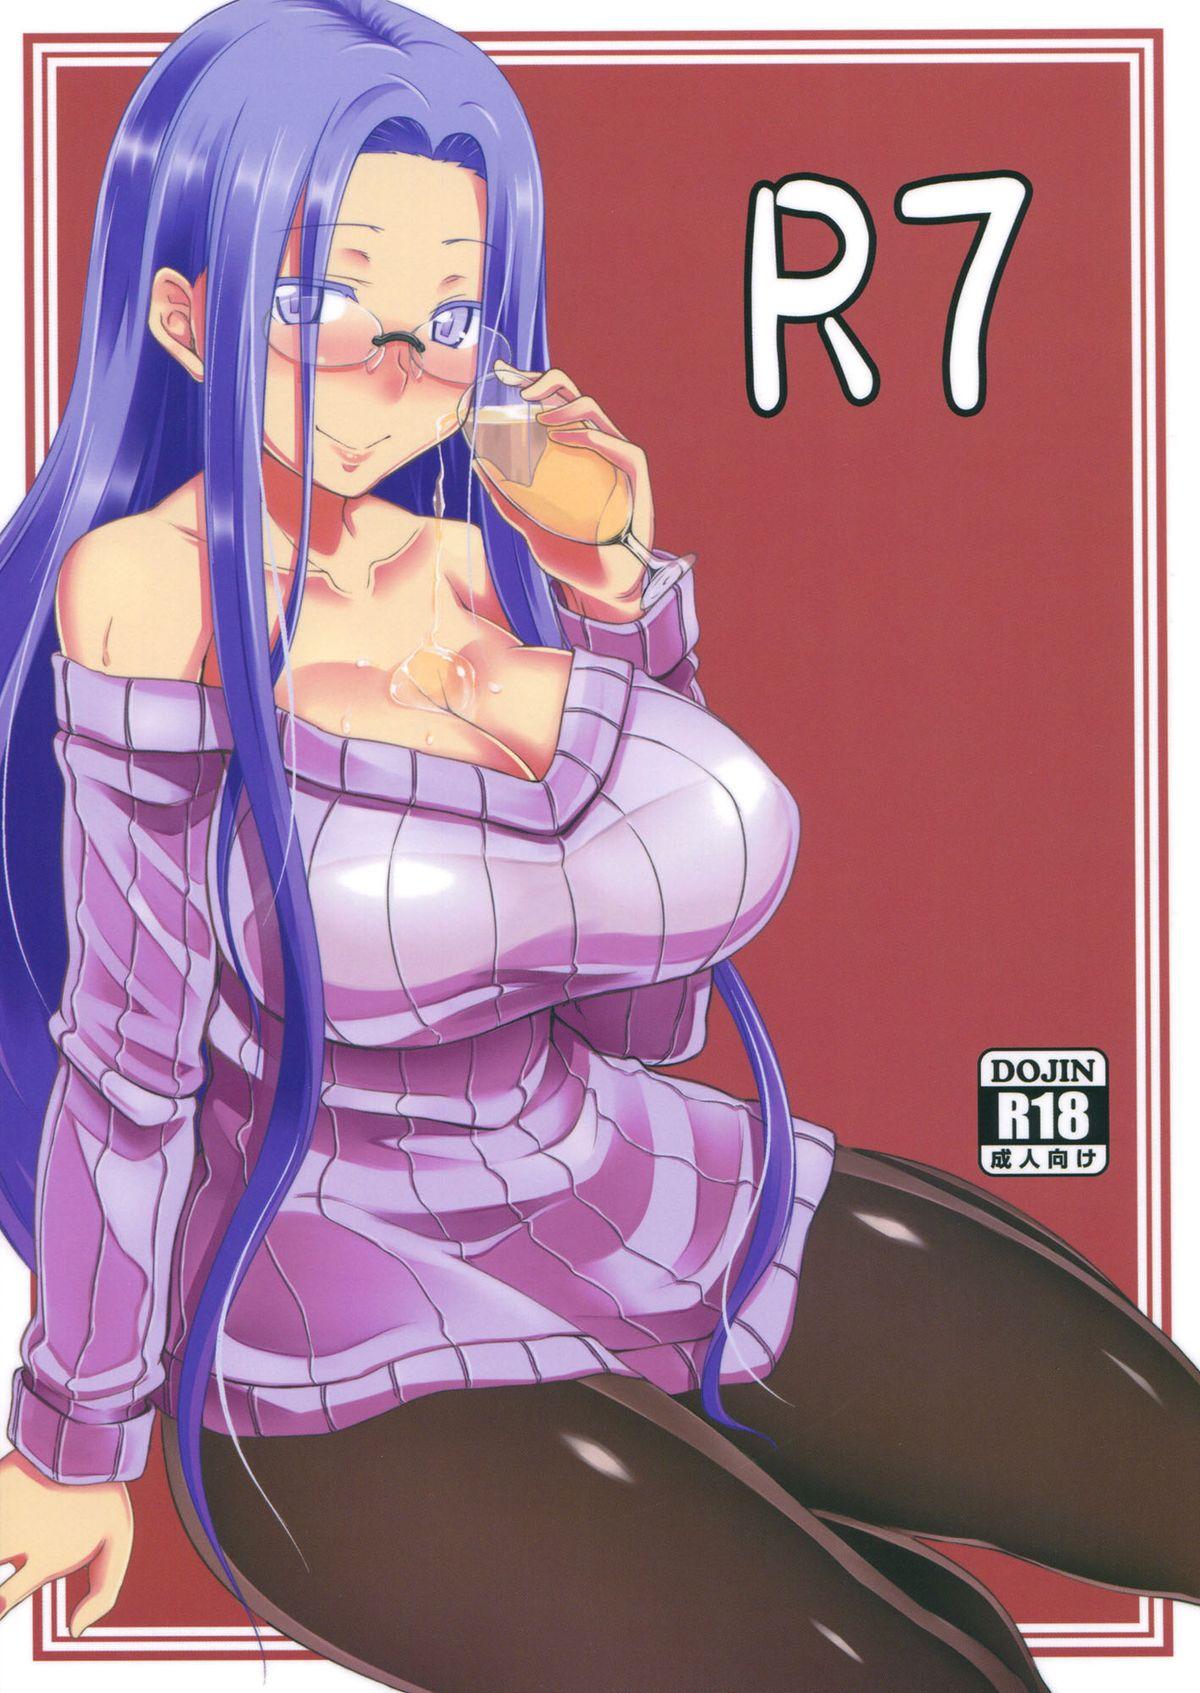 Ngentot R7 - Fate stay night Fate hollow ataraxia Piss - Page 1